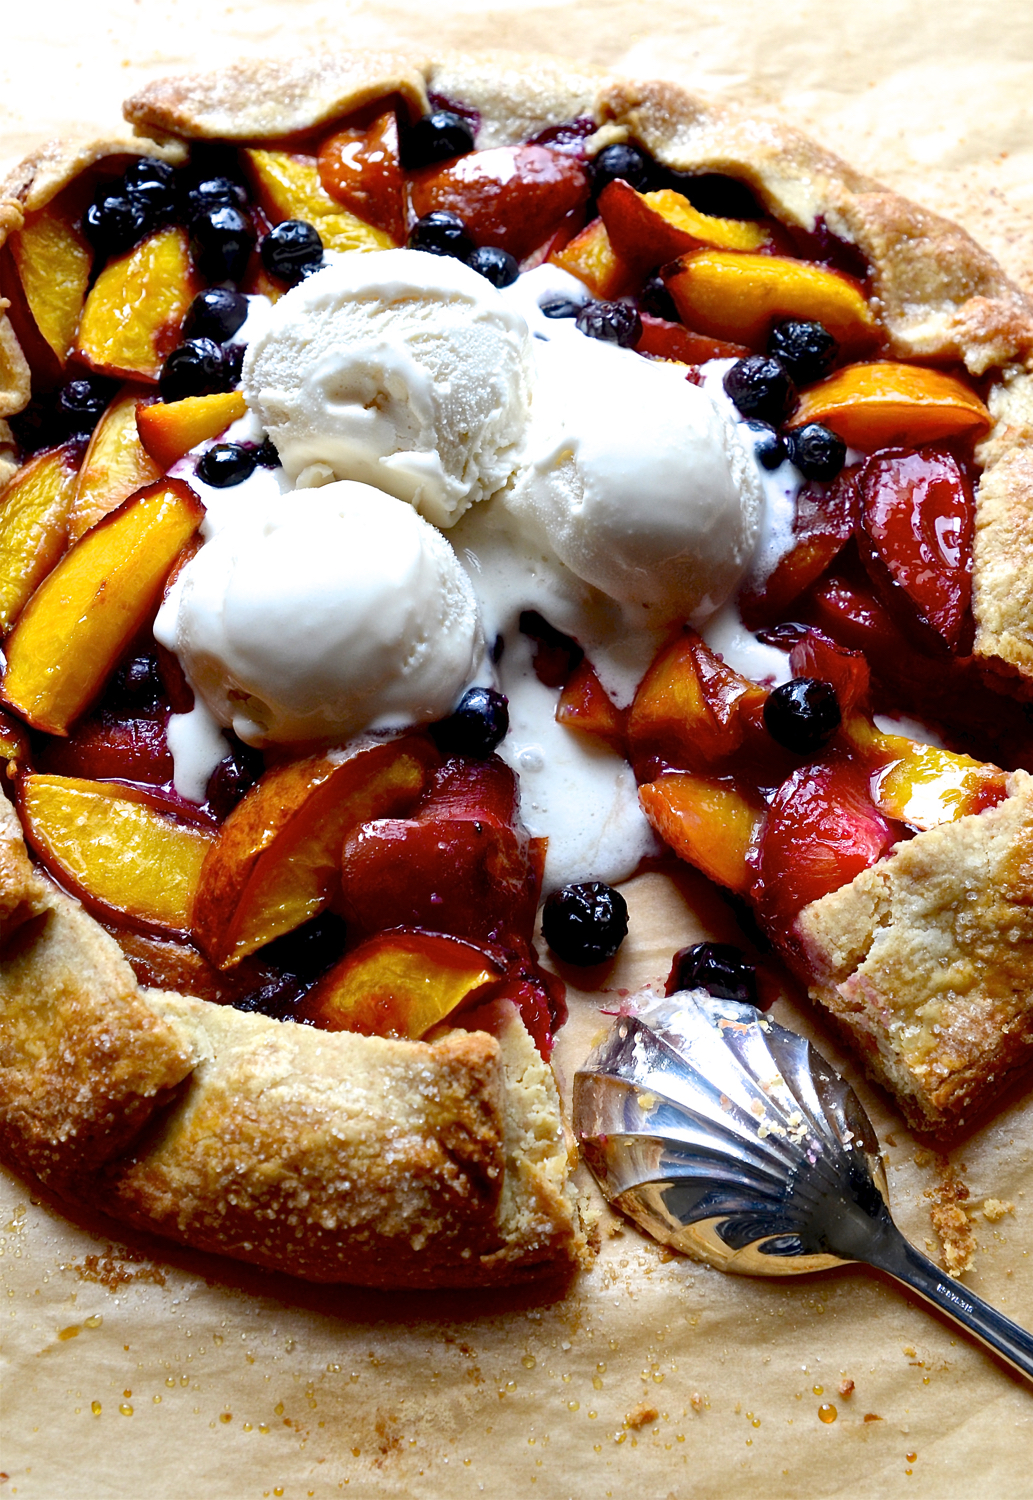 Nectarine and blueberry galette